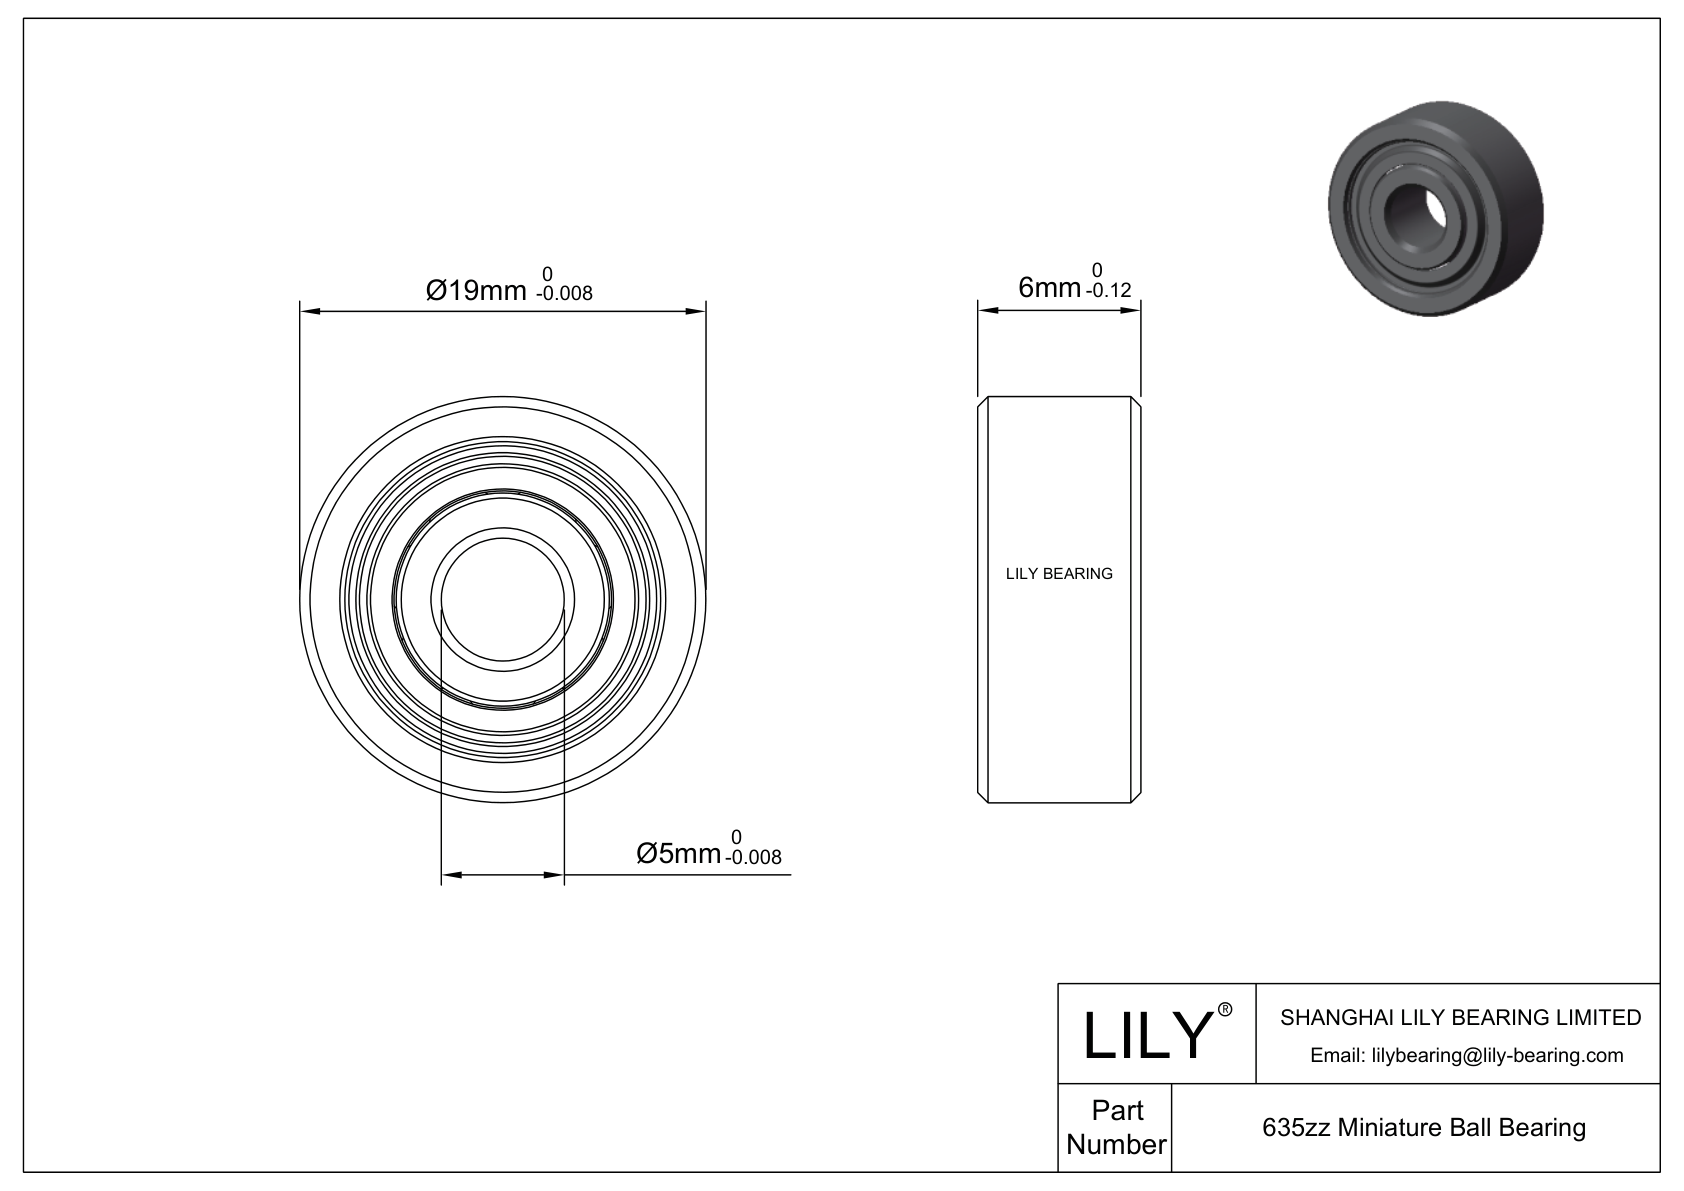 LILY-PUT63530-30 Outsourcing Polyurethane bearings cad drawing